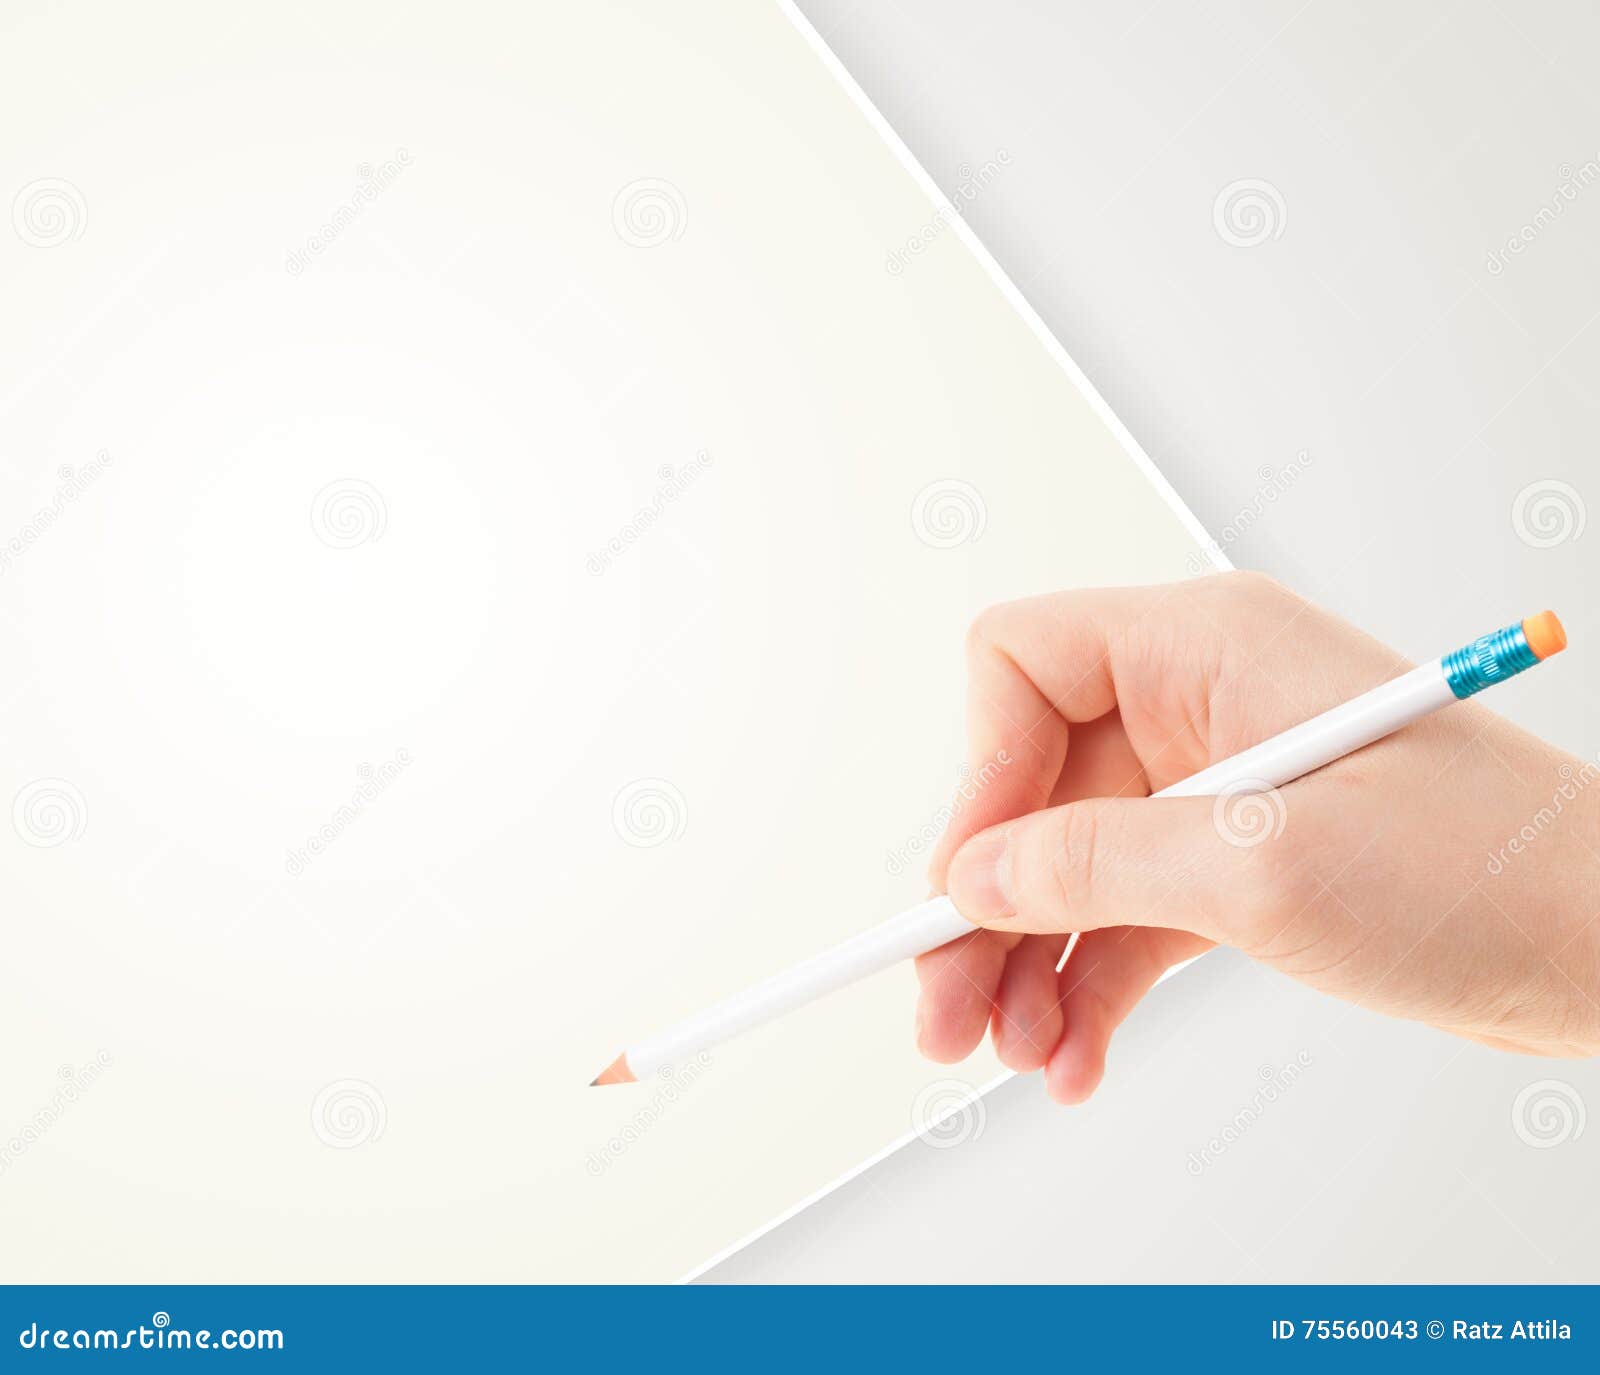 Human Hand Drawing with Pencil on Empty Paper Template Stock Image ...